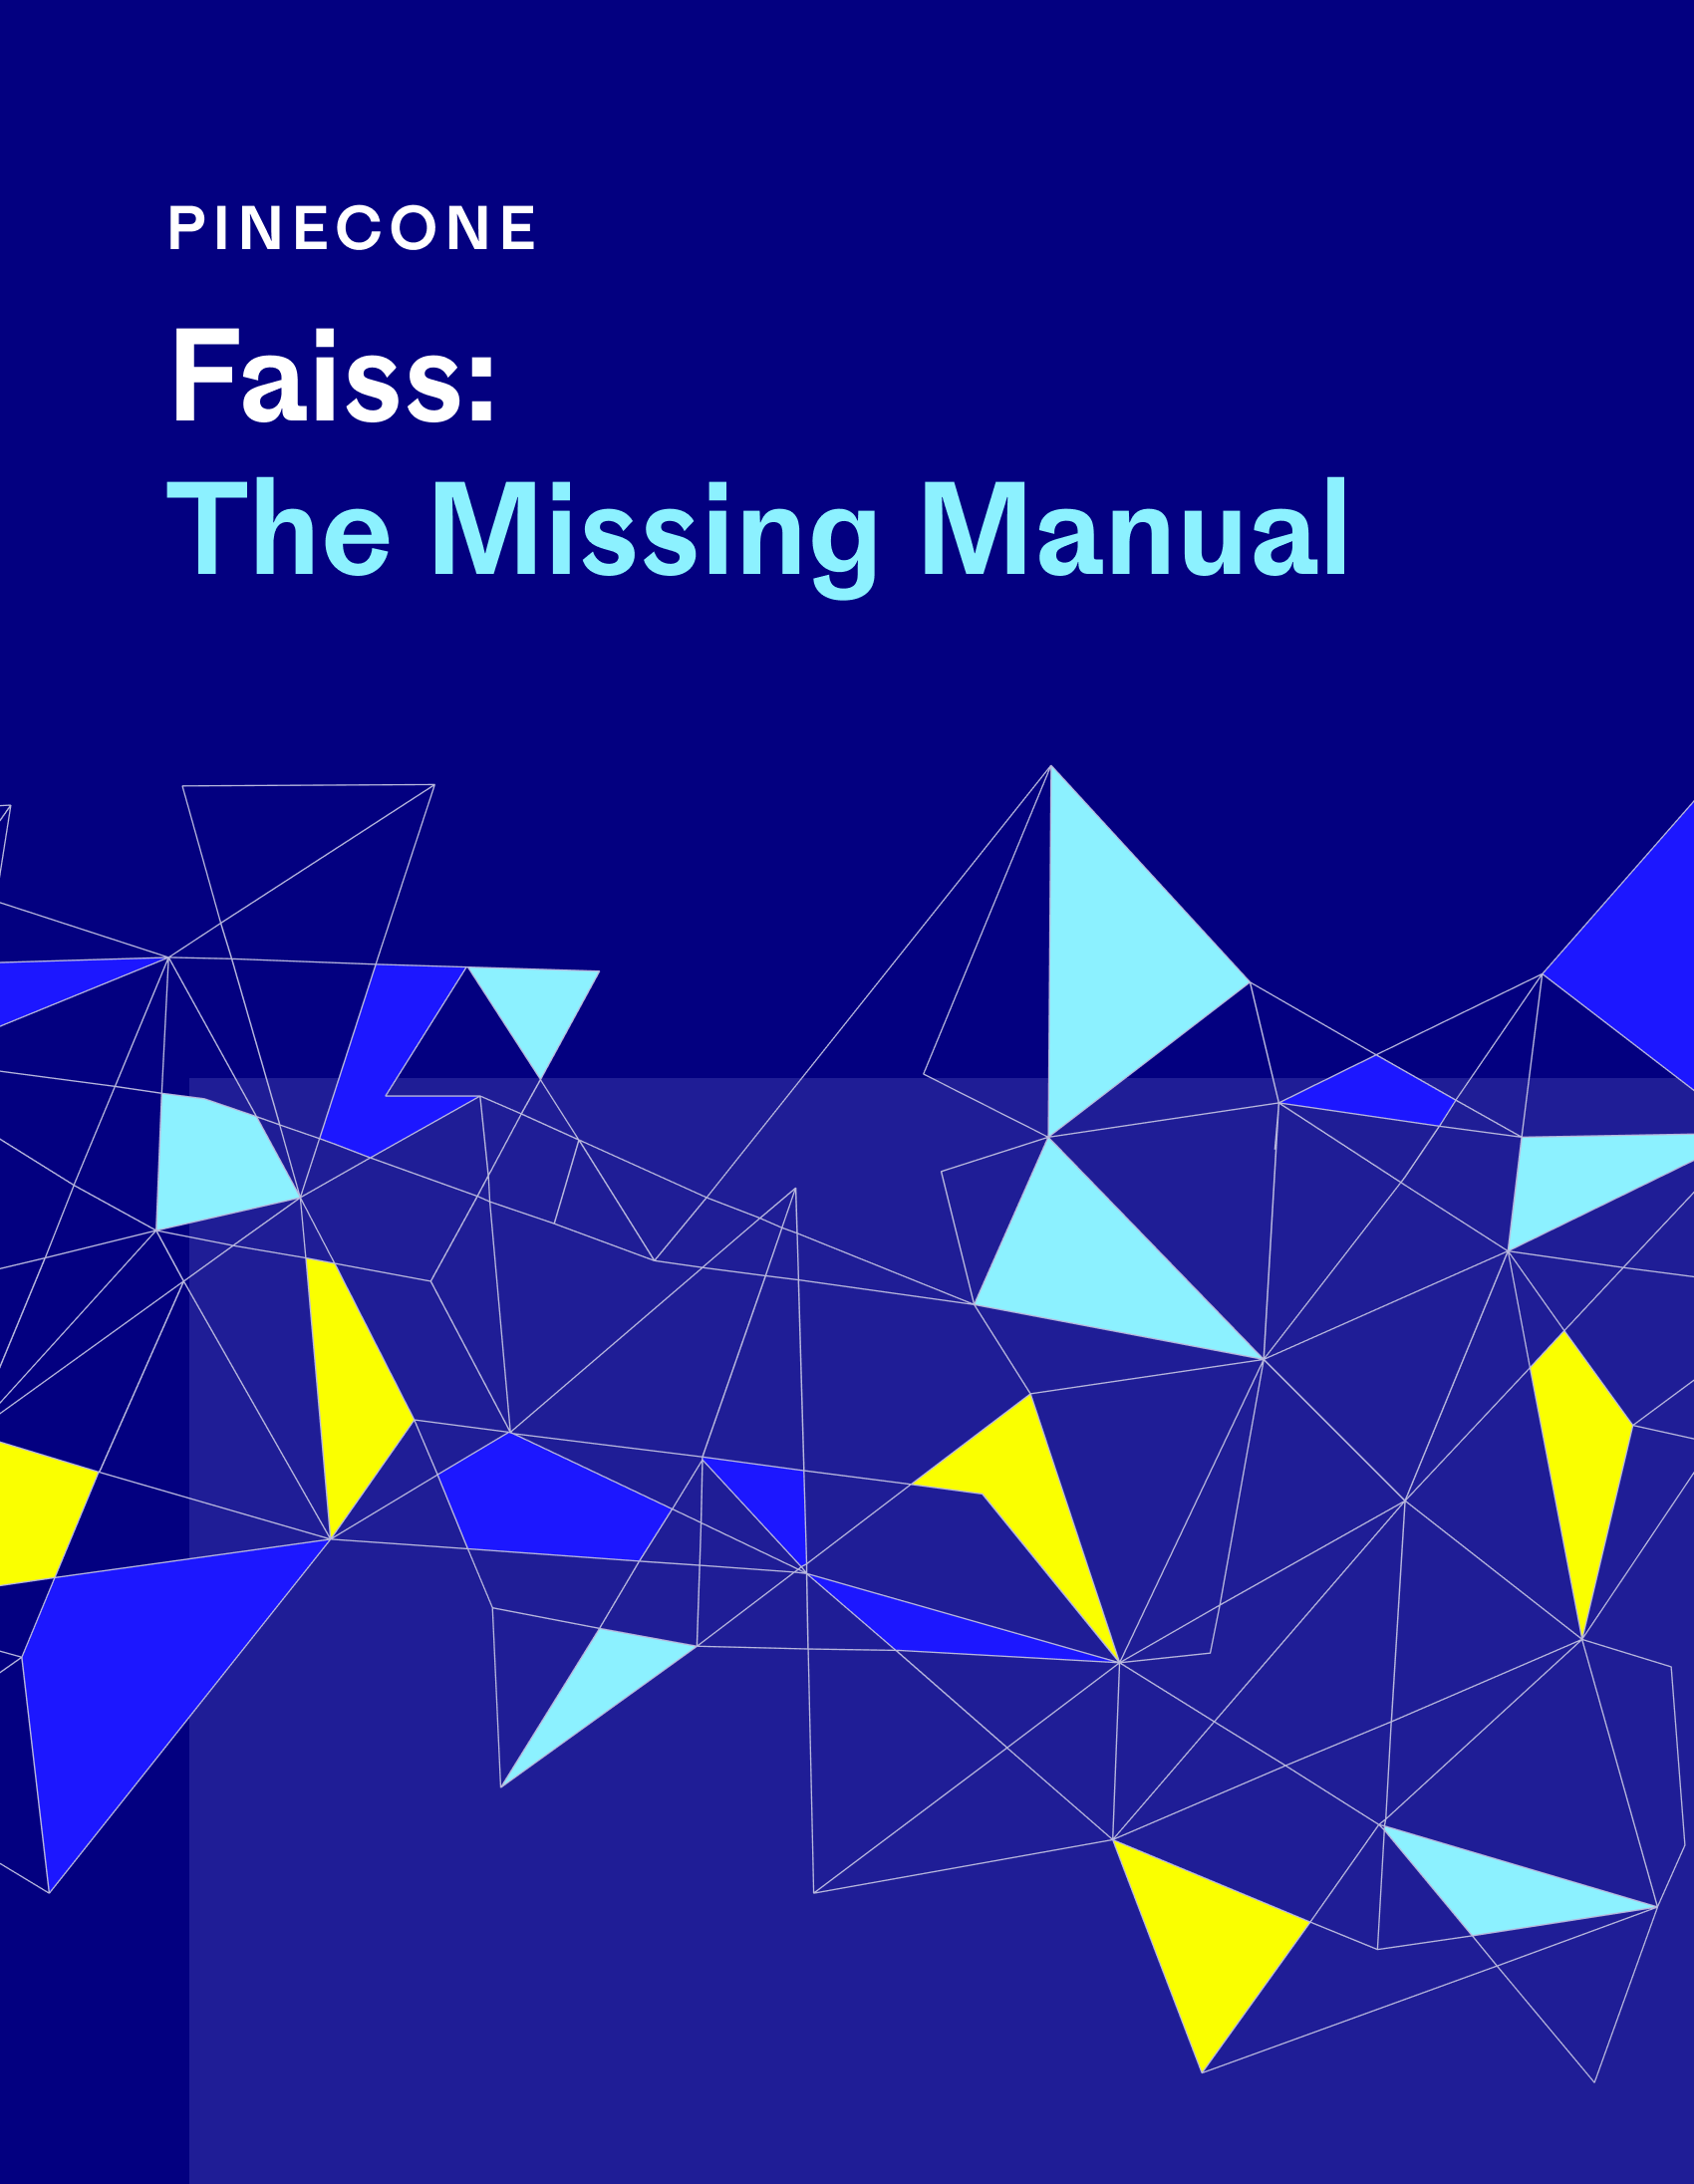 Faiss: The Missing Manual by James Briggs